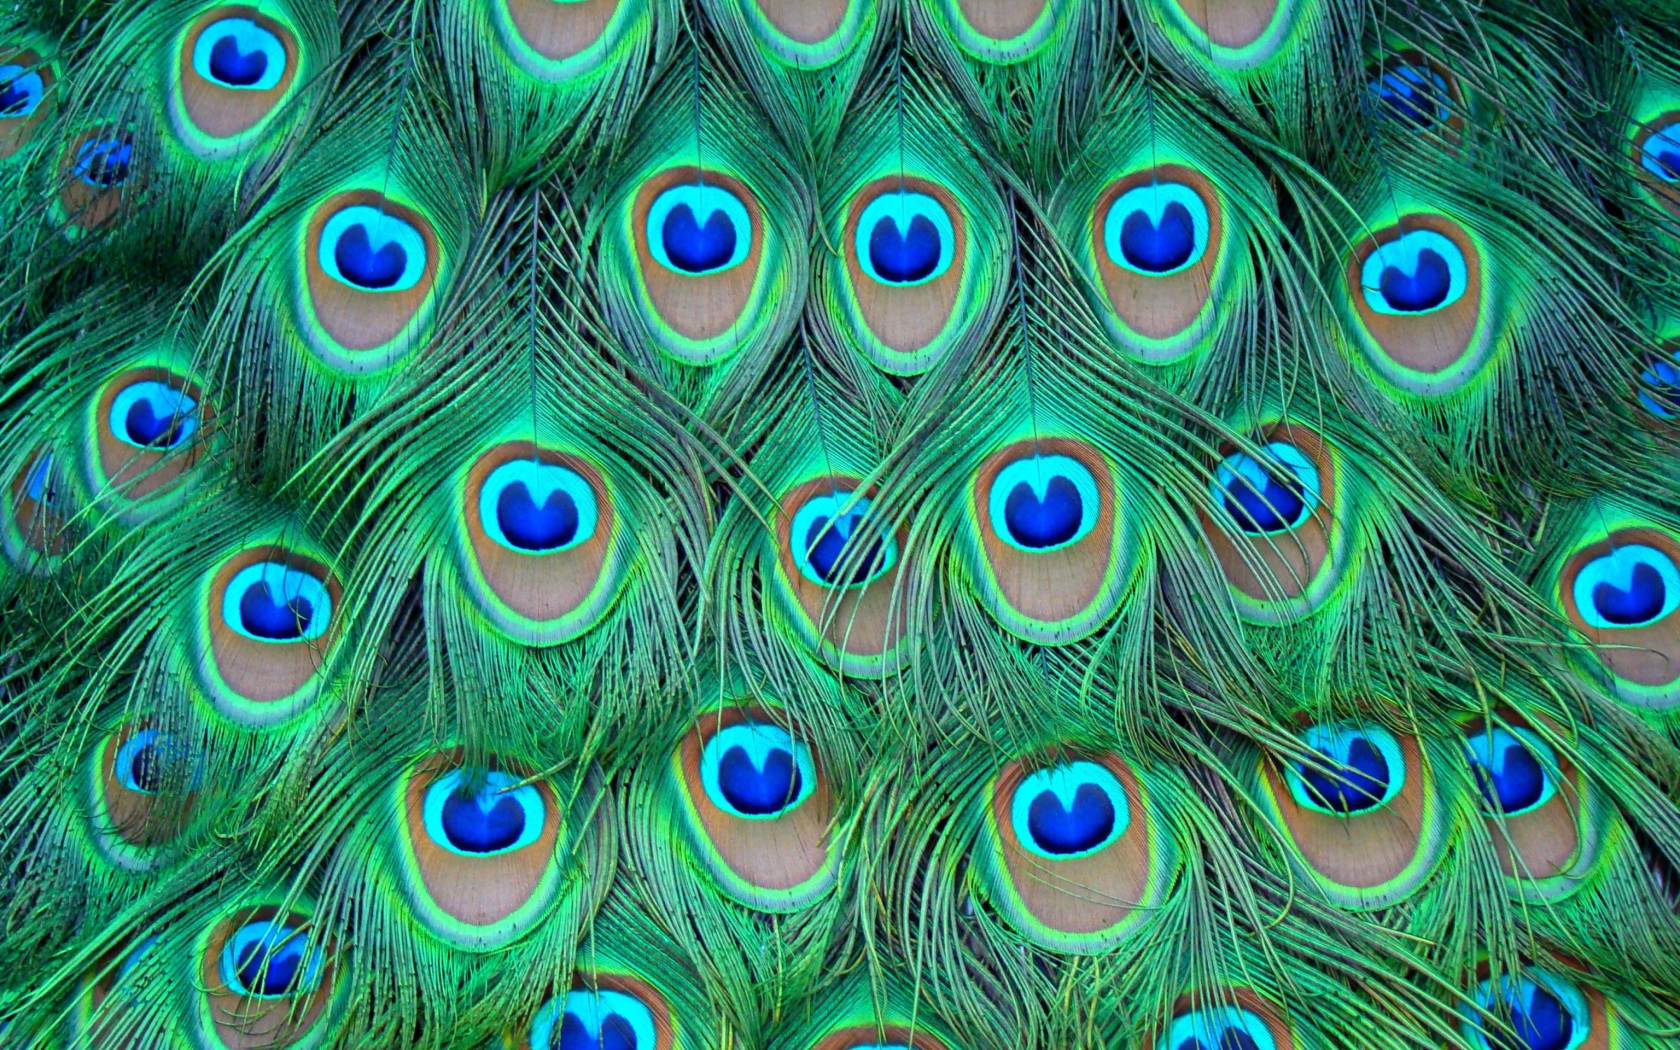 Peacock Feathers wallpaper 1680x1050